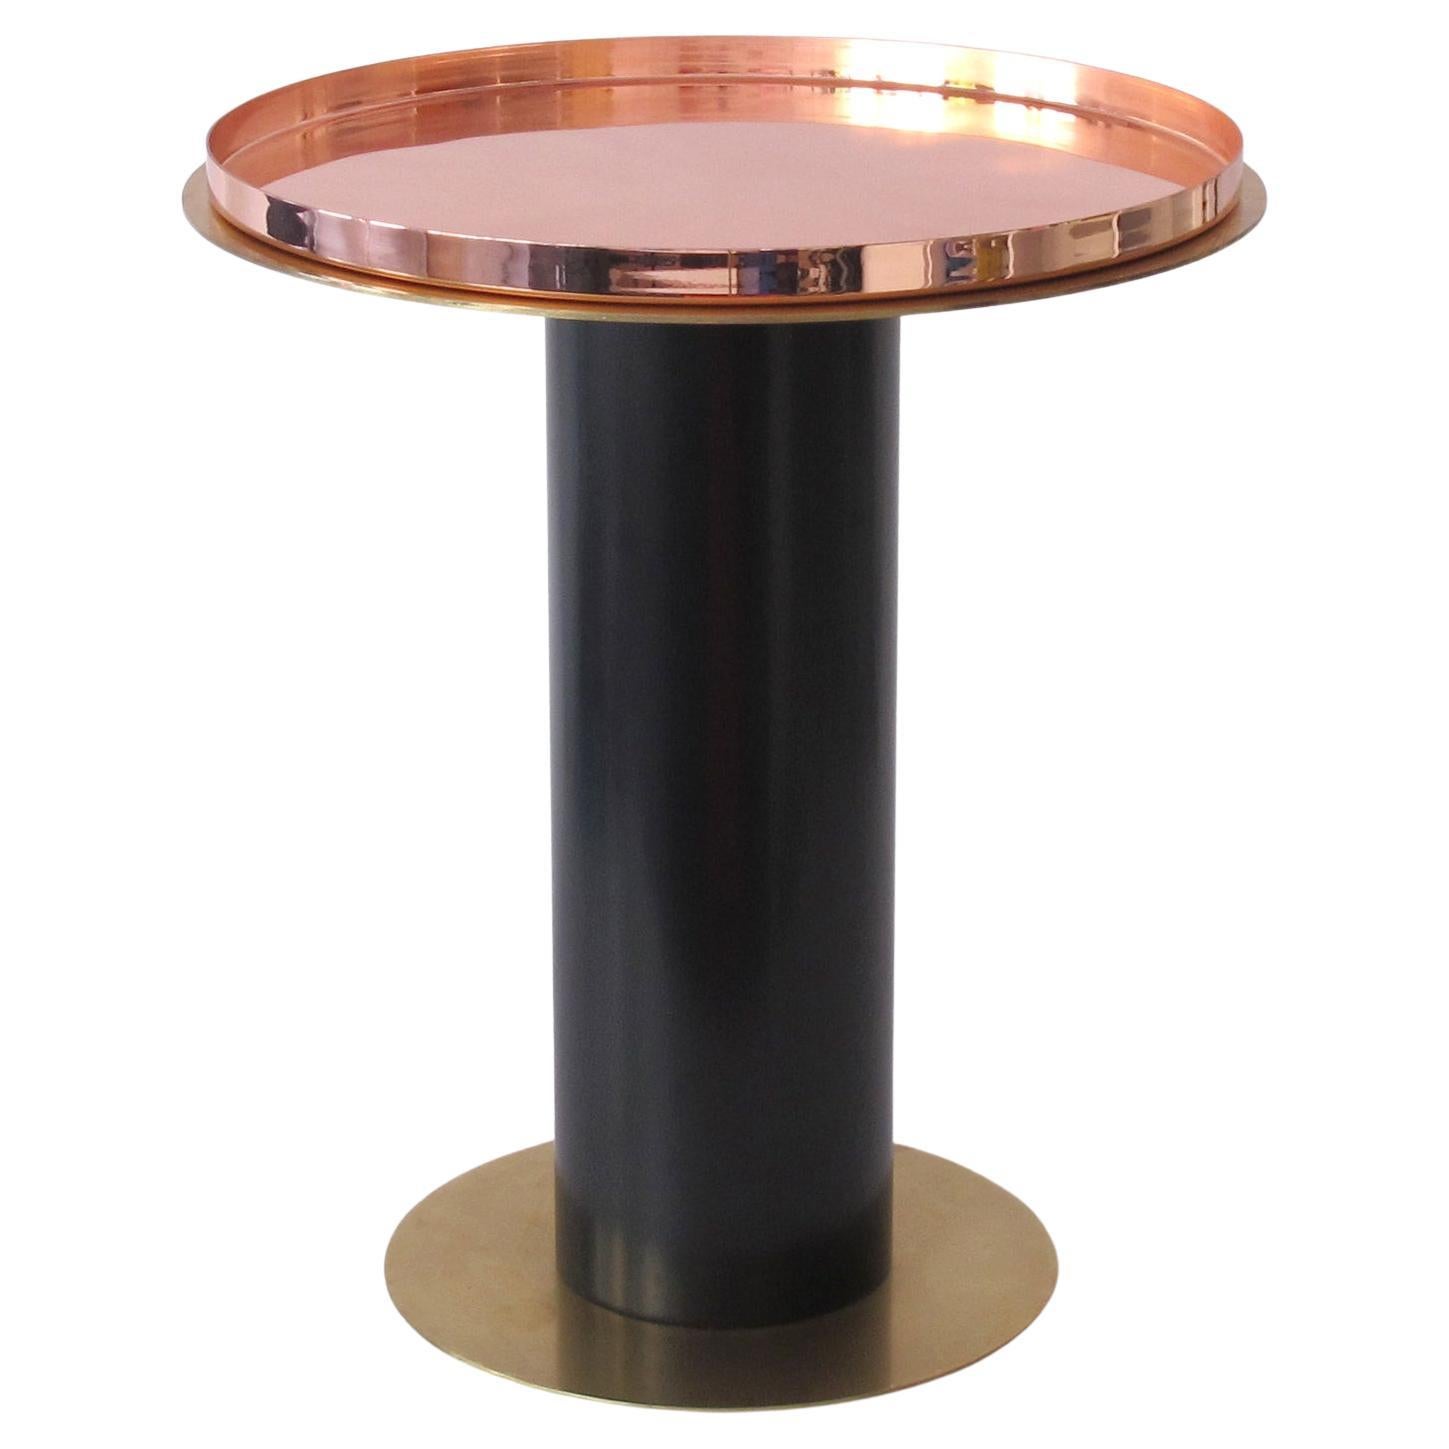 'Reel' Minimalist Brass Side Table with Copper Tray